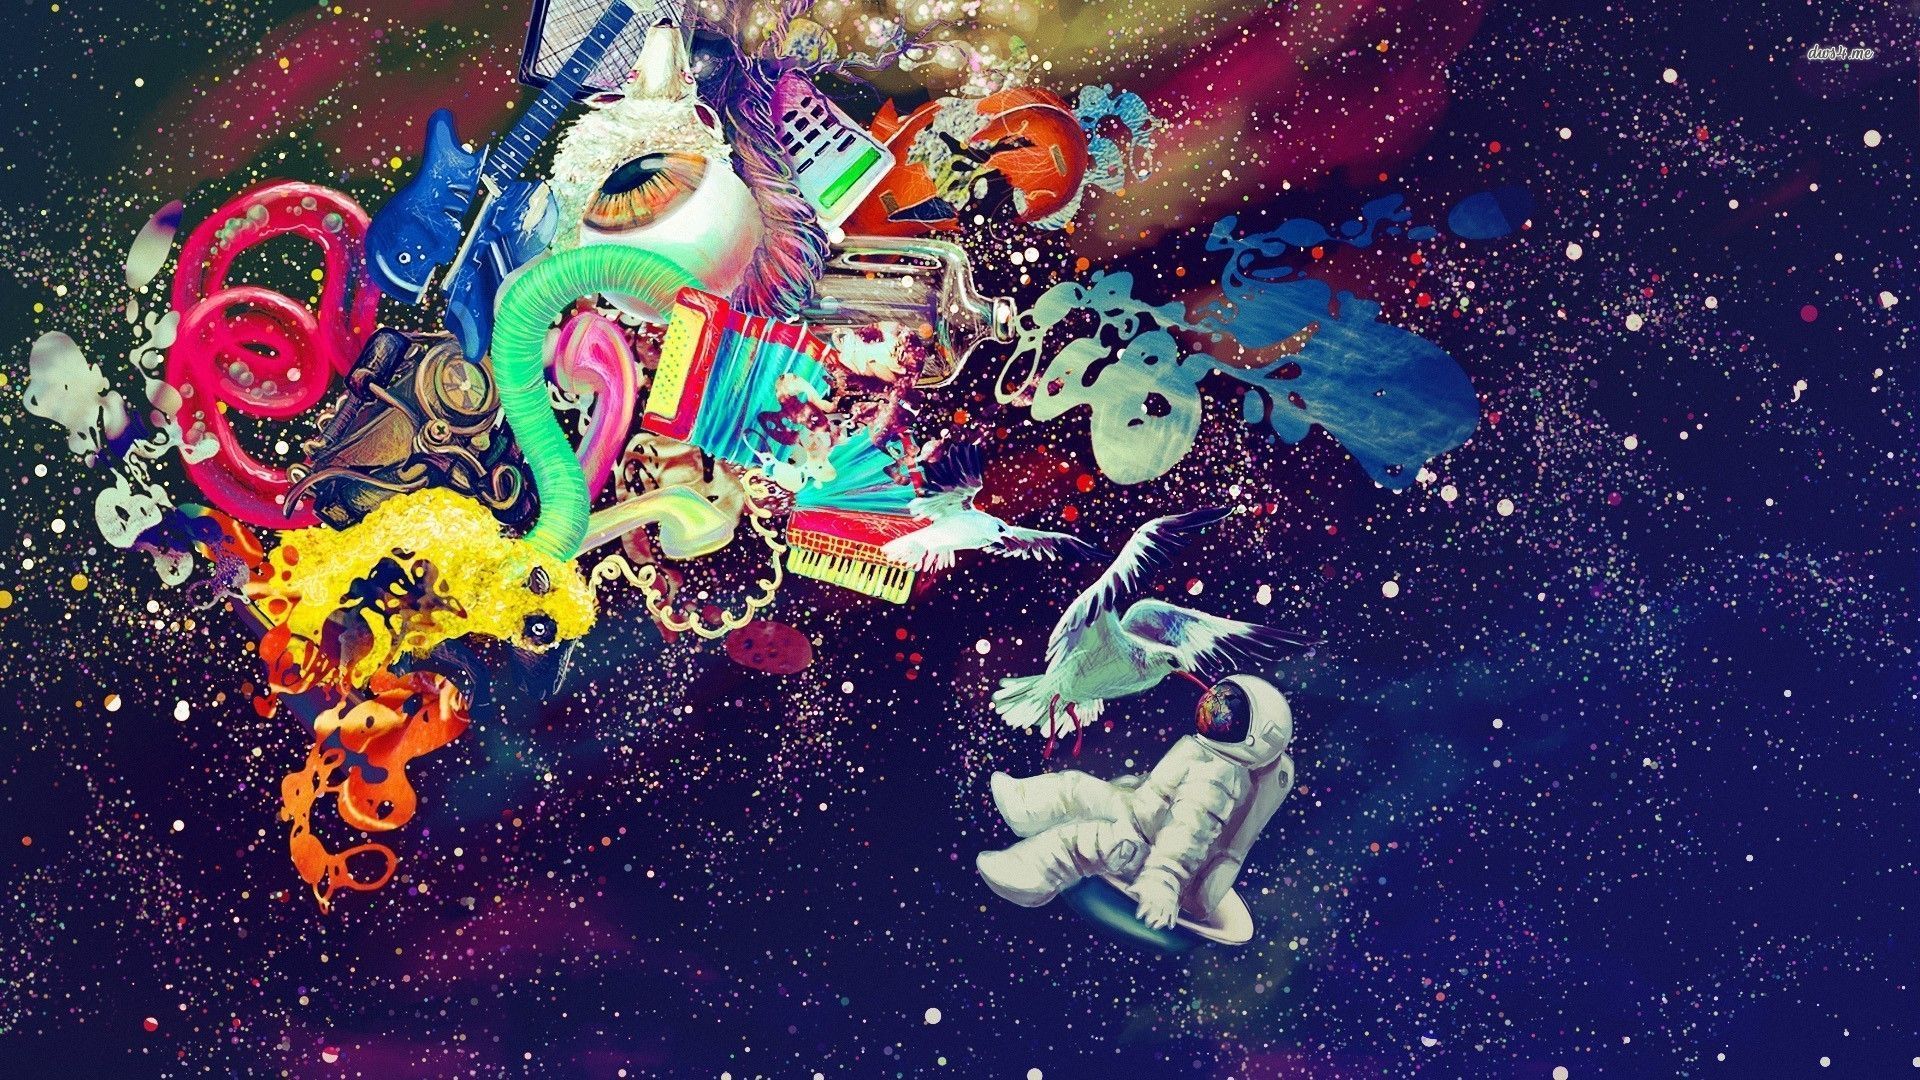 Rainbow Astronaut Wallpaper about space